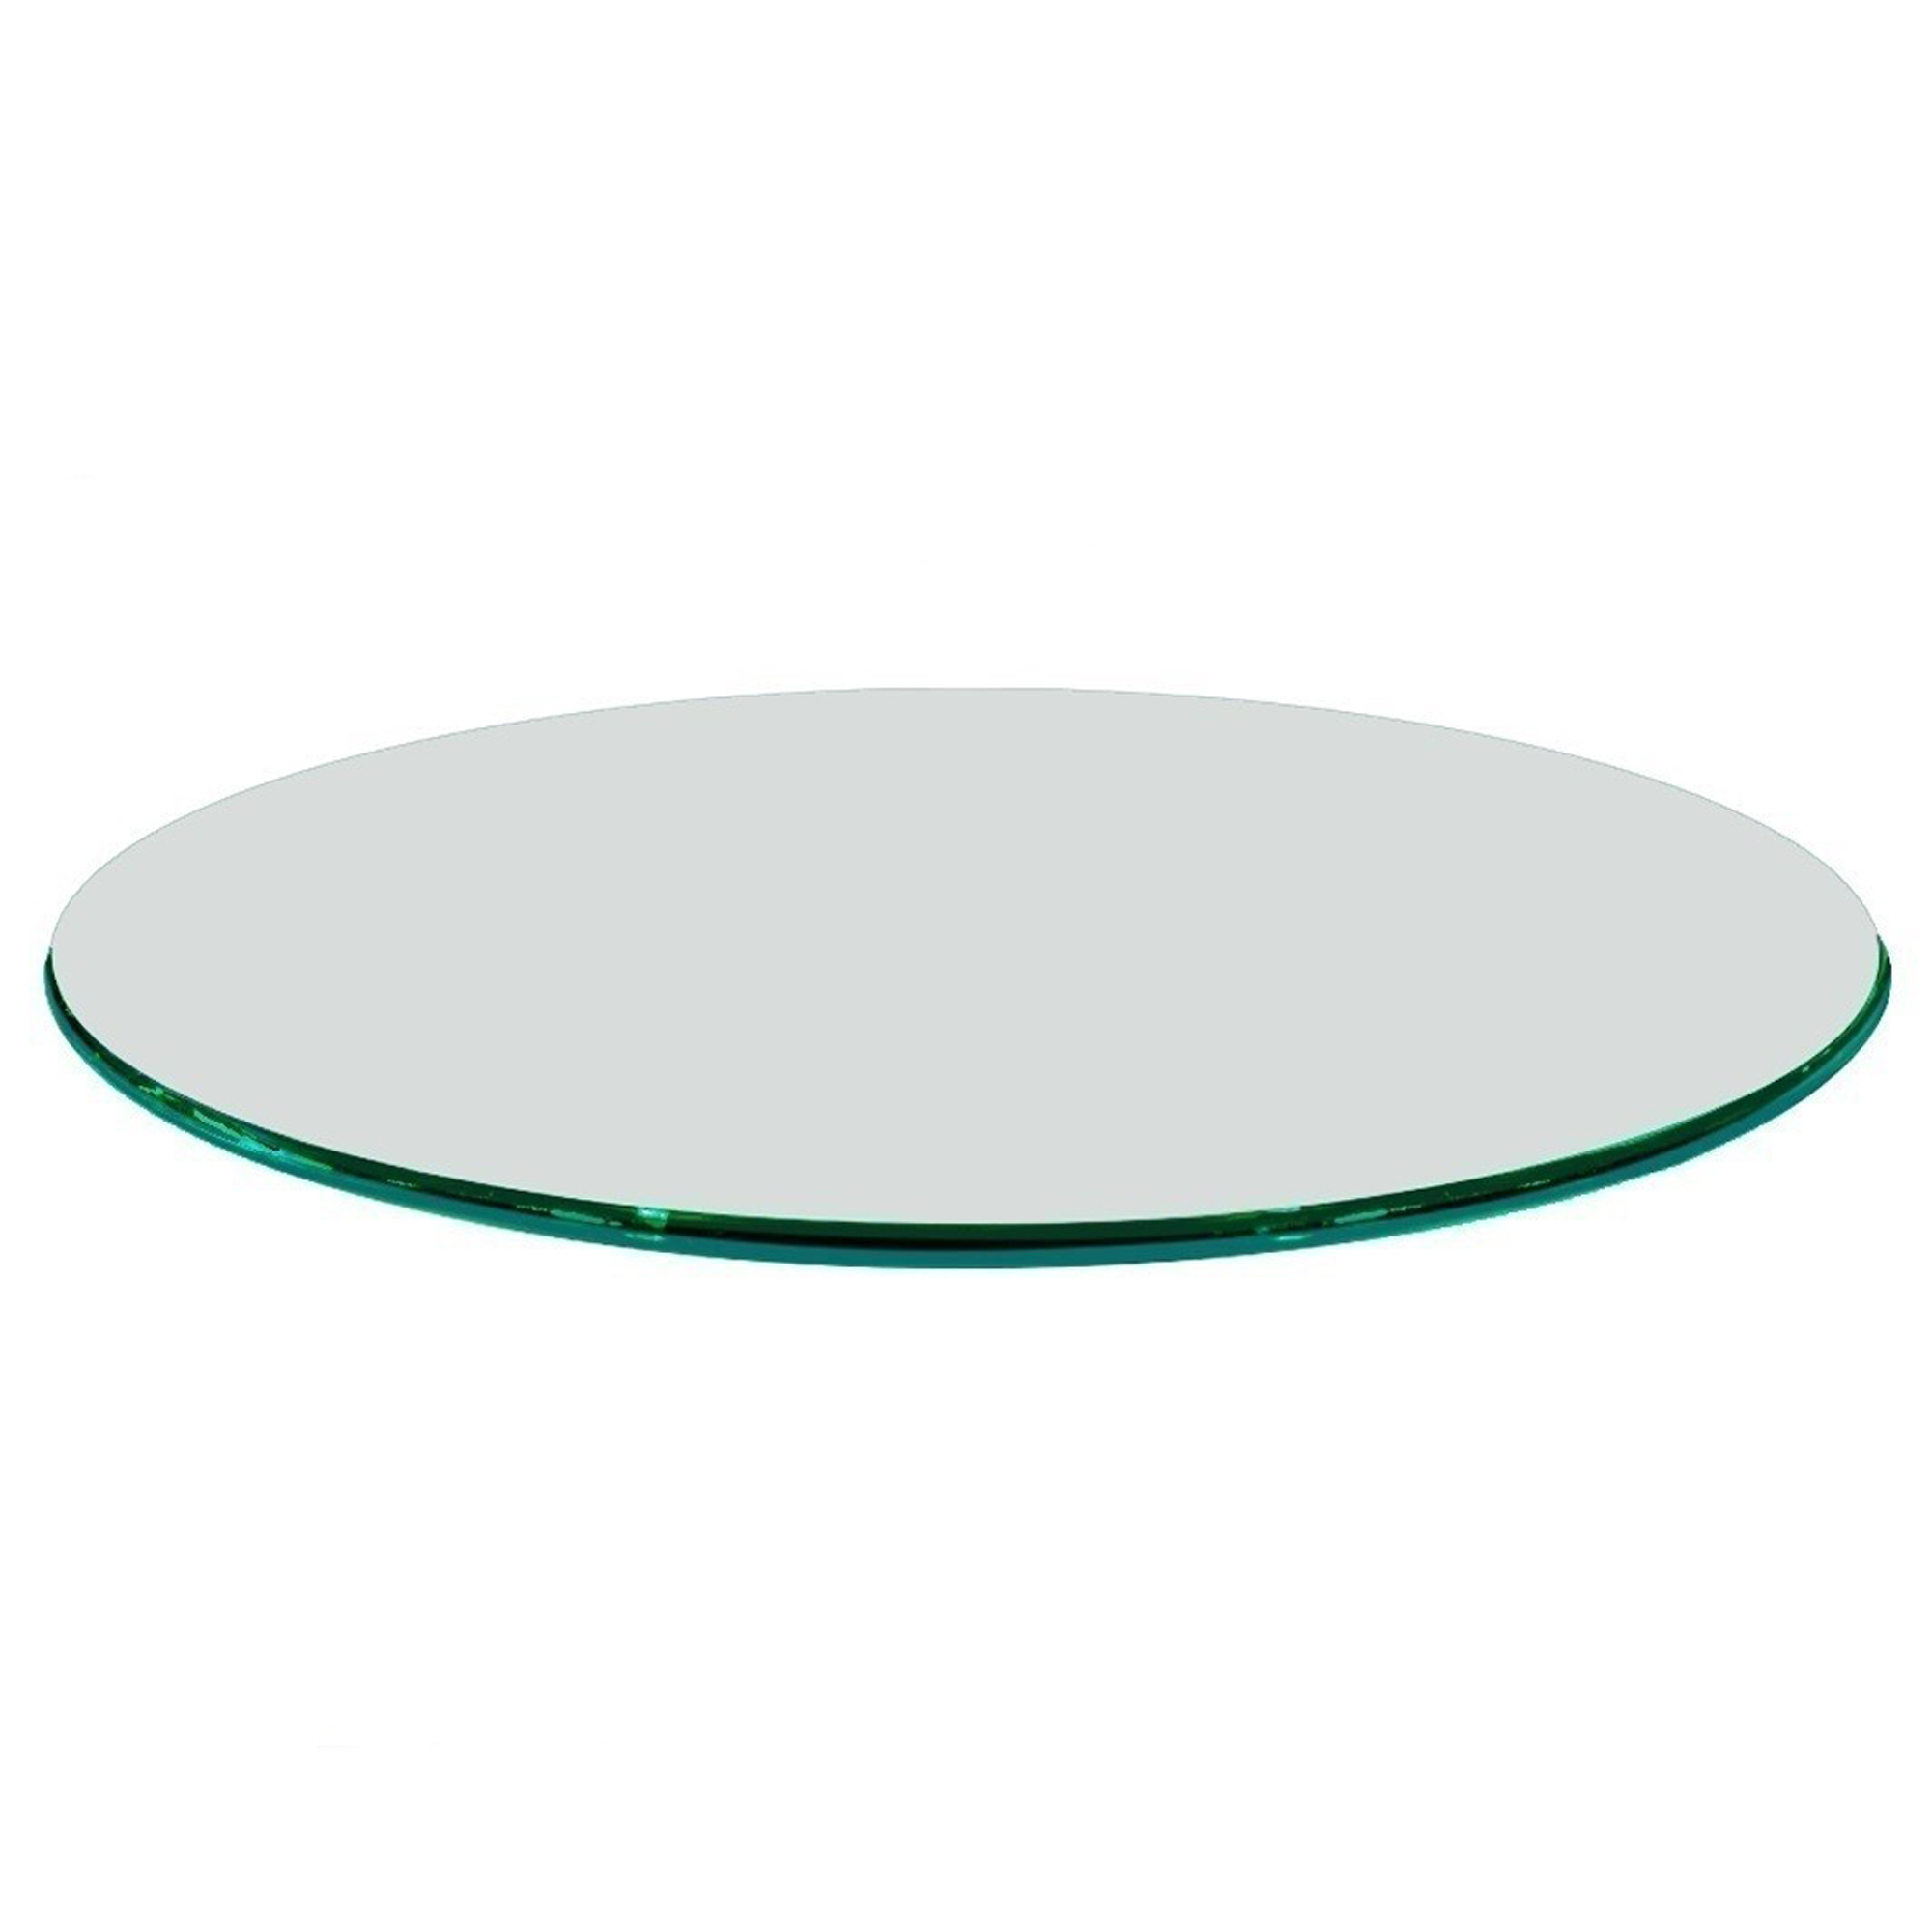 Glass Table Tops Cover, 54 Round Glass Table Protector